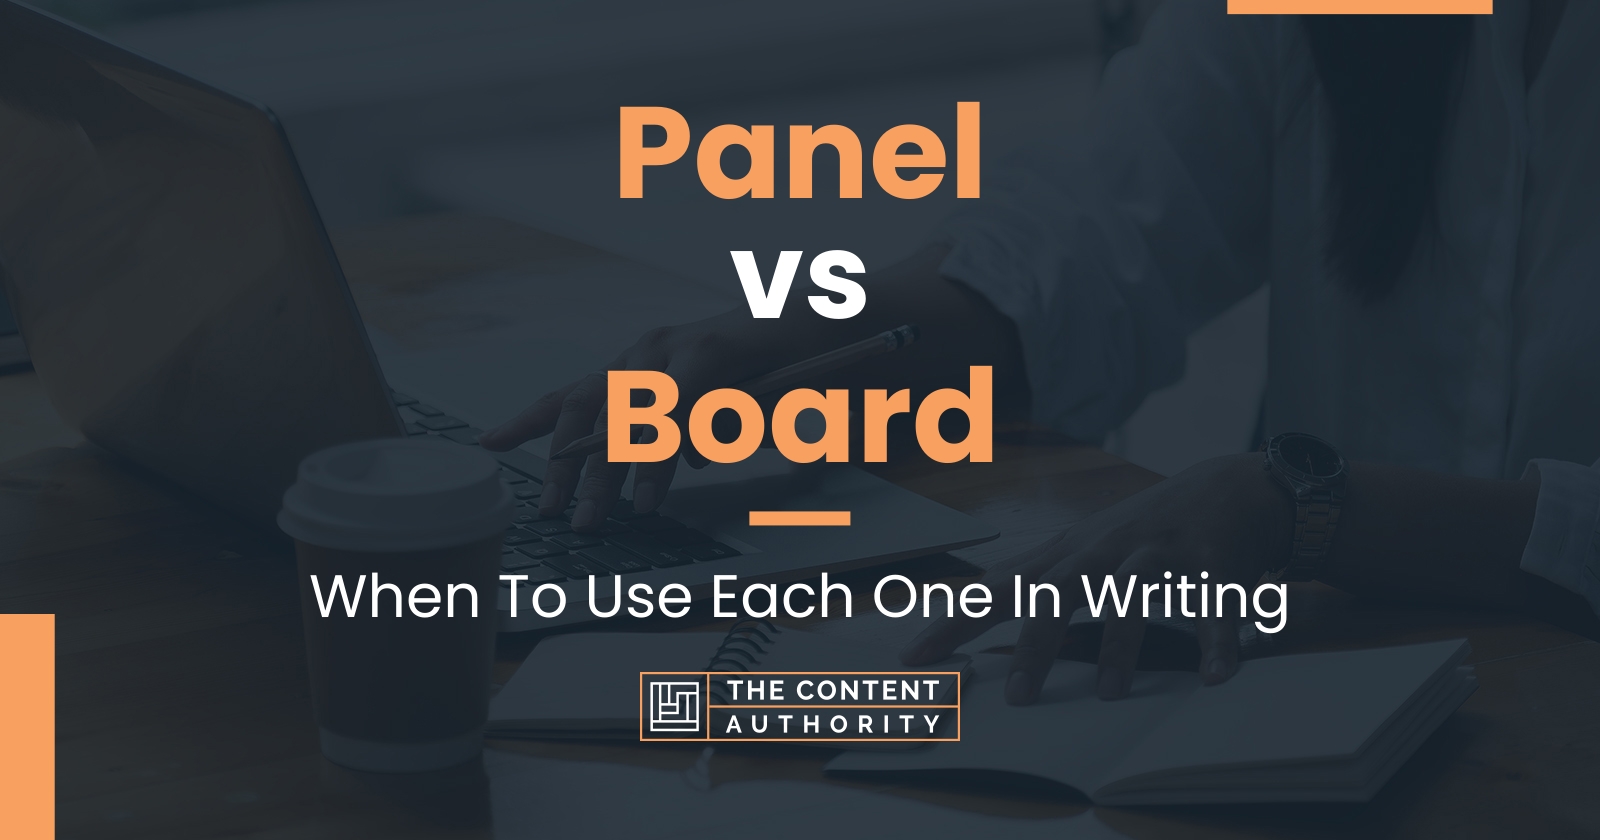 Panel vs Board: When To Use Each One In Writing